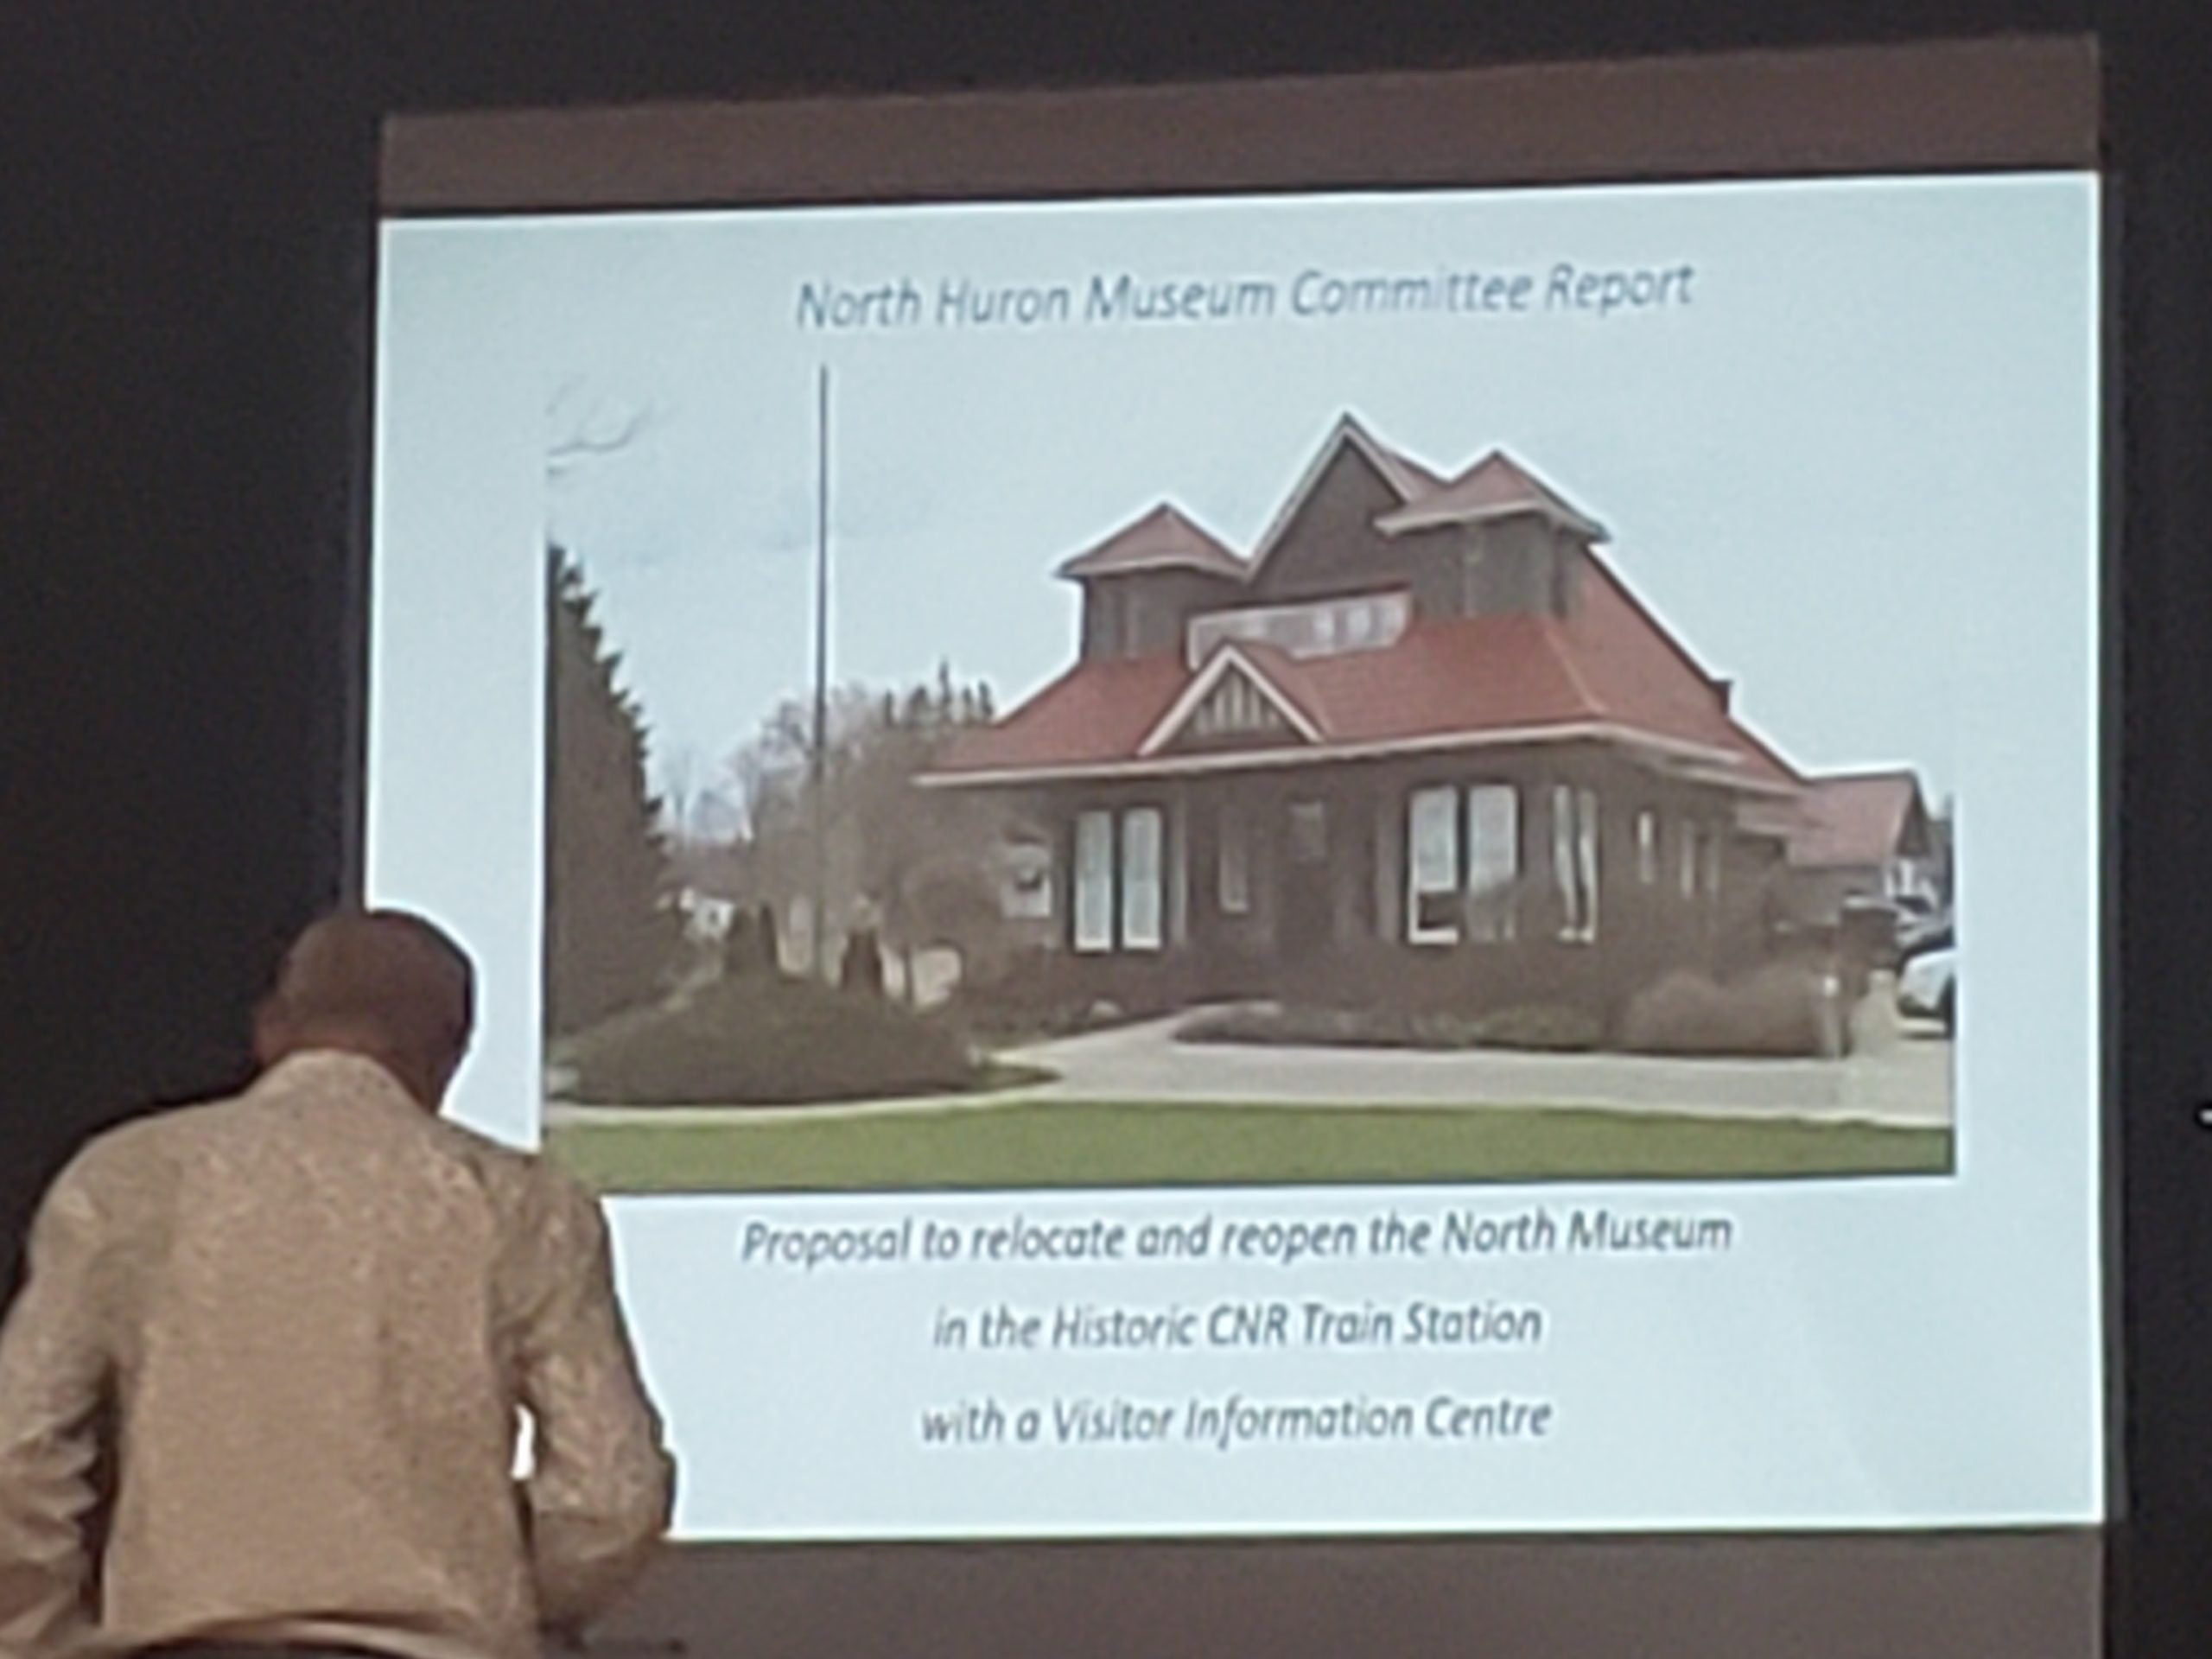 North Huron ready to select members of the Fundraising Committee for the North Huron Museum Relocation